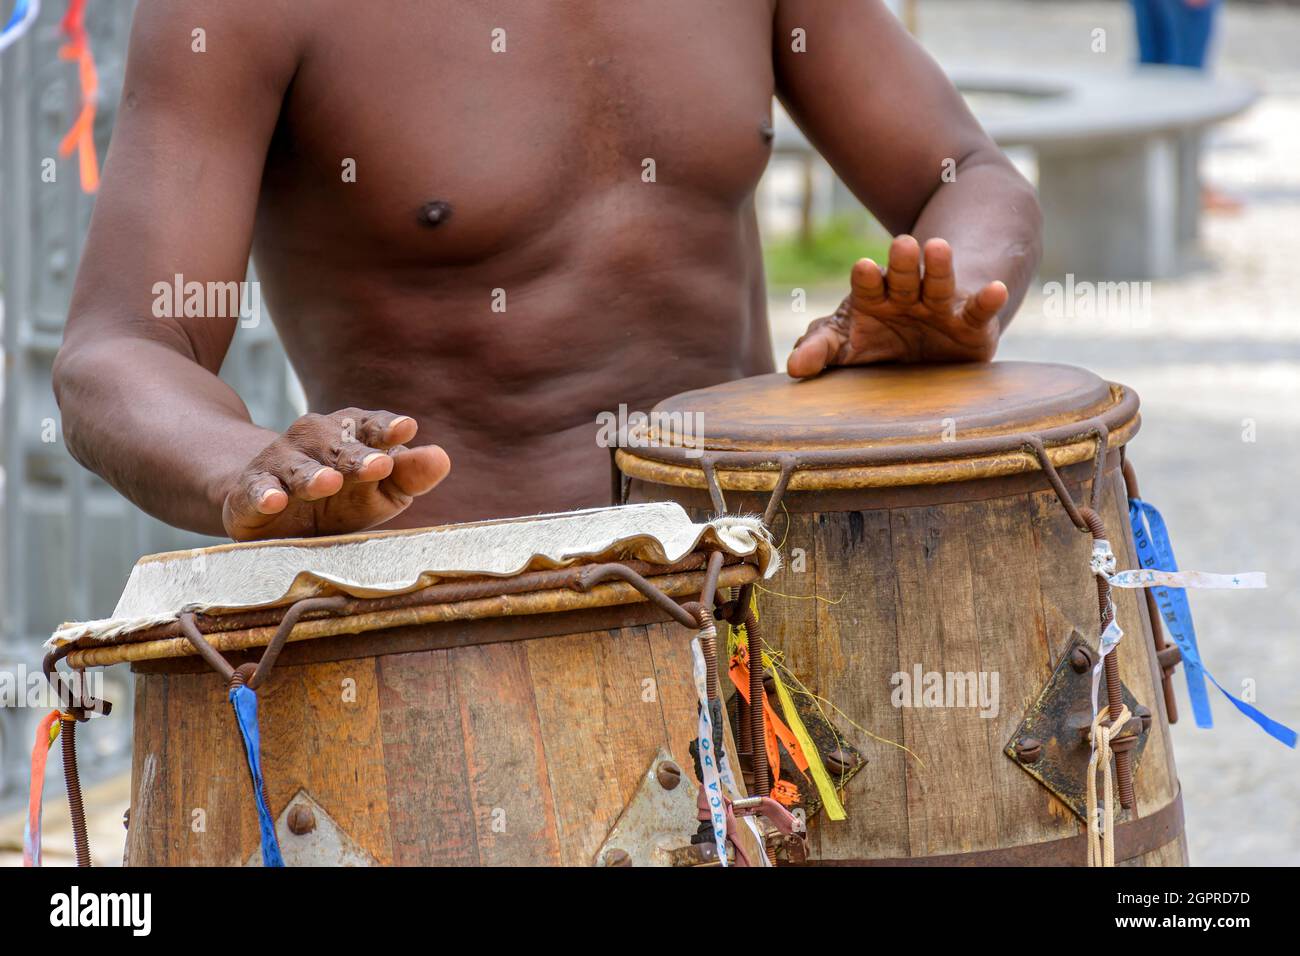 Musician playing atabaque which is a percussion instrument of African origin used in samba, capoeira, umbanda, candomble and various cultural, artisti Stock Photo